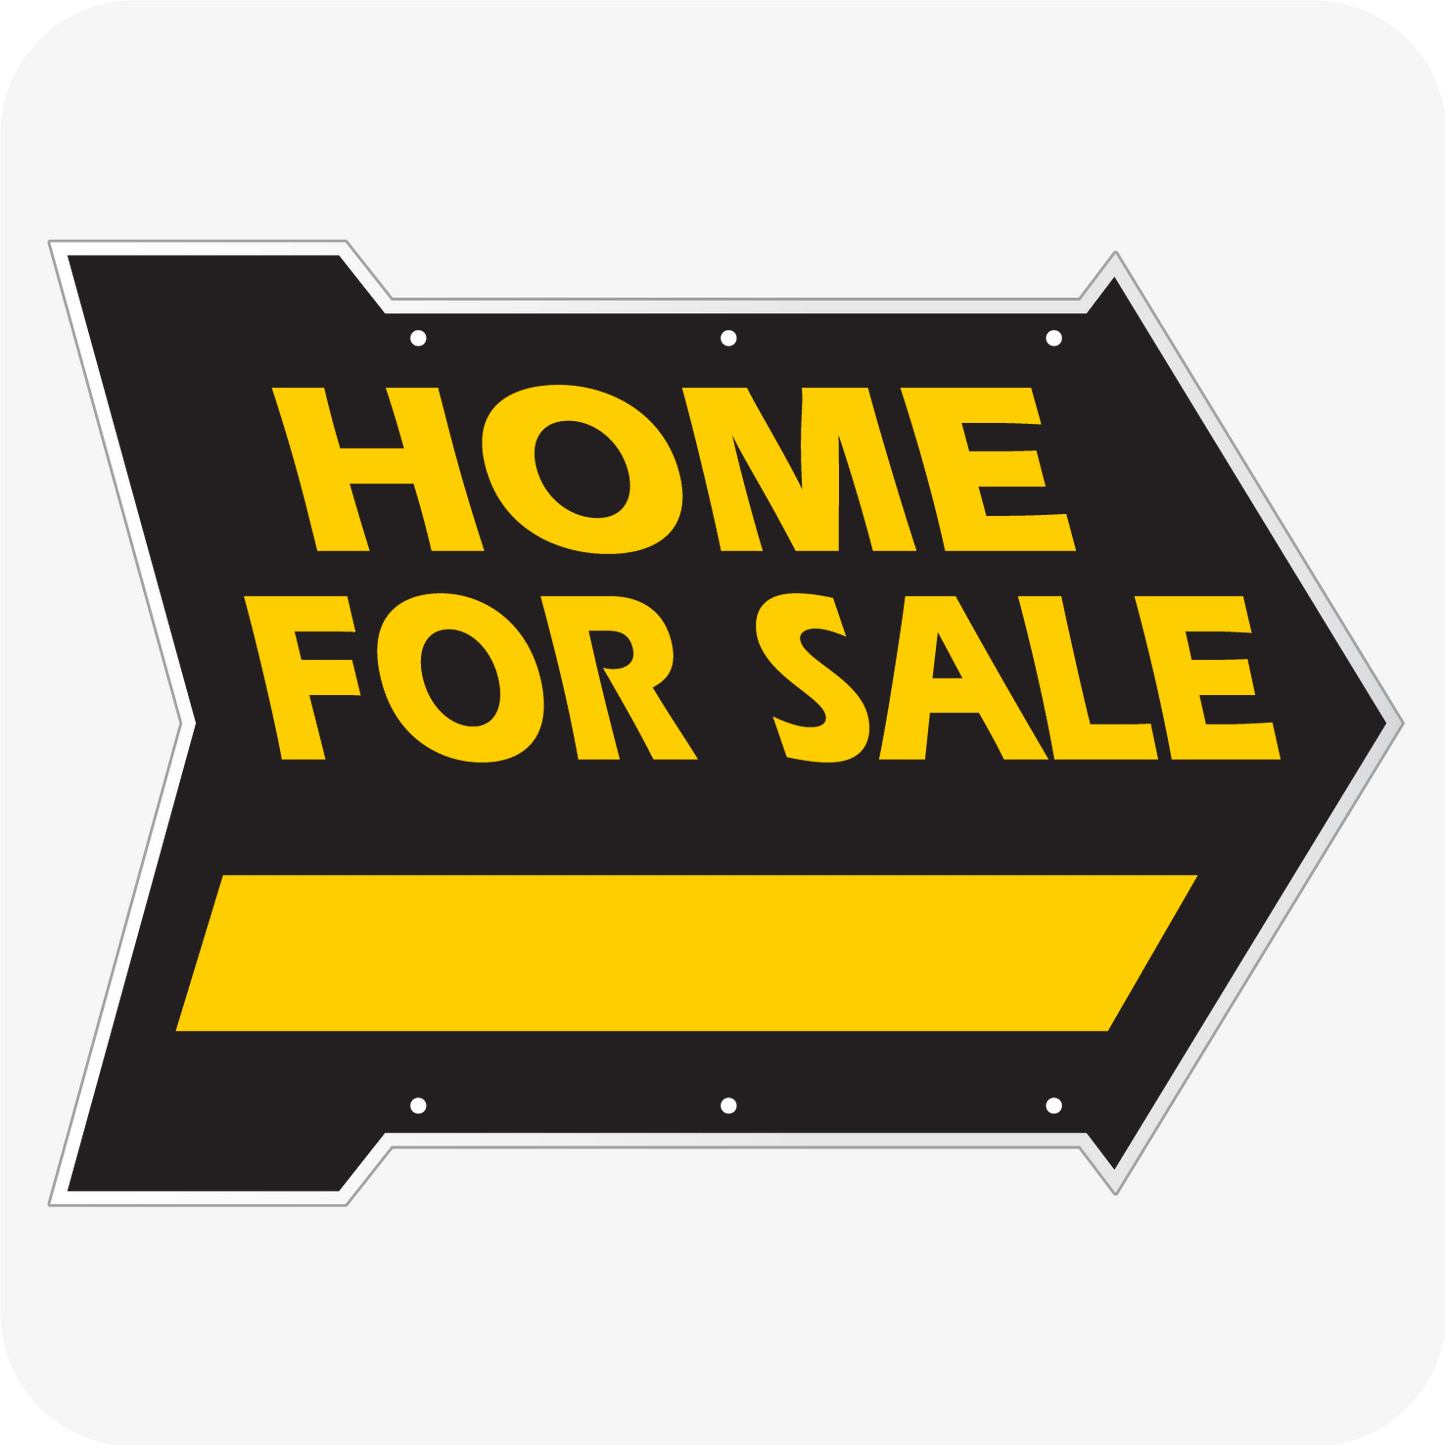 Home for Sale 18 x 24 Arrow with Blank - Black and Yellow